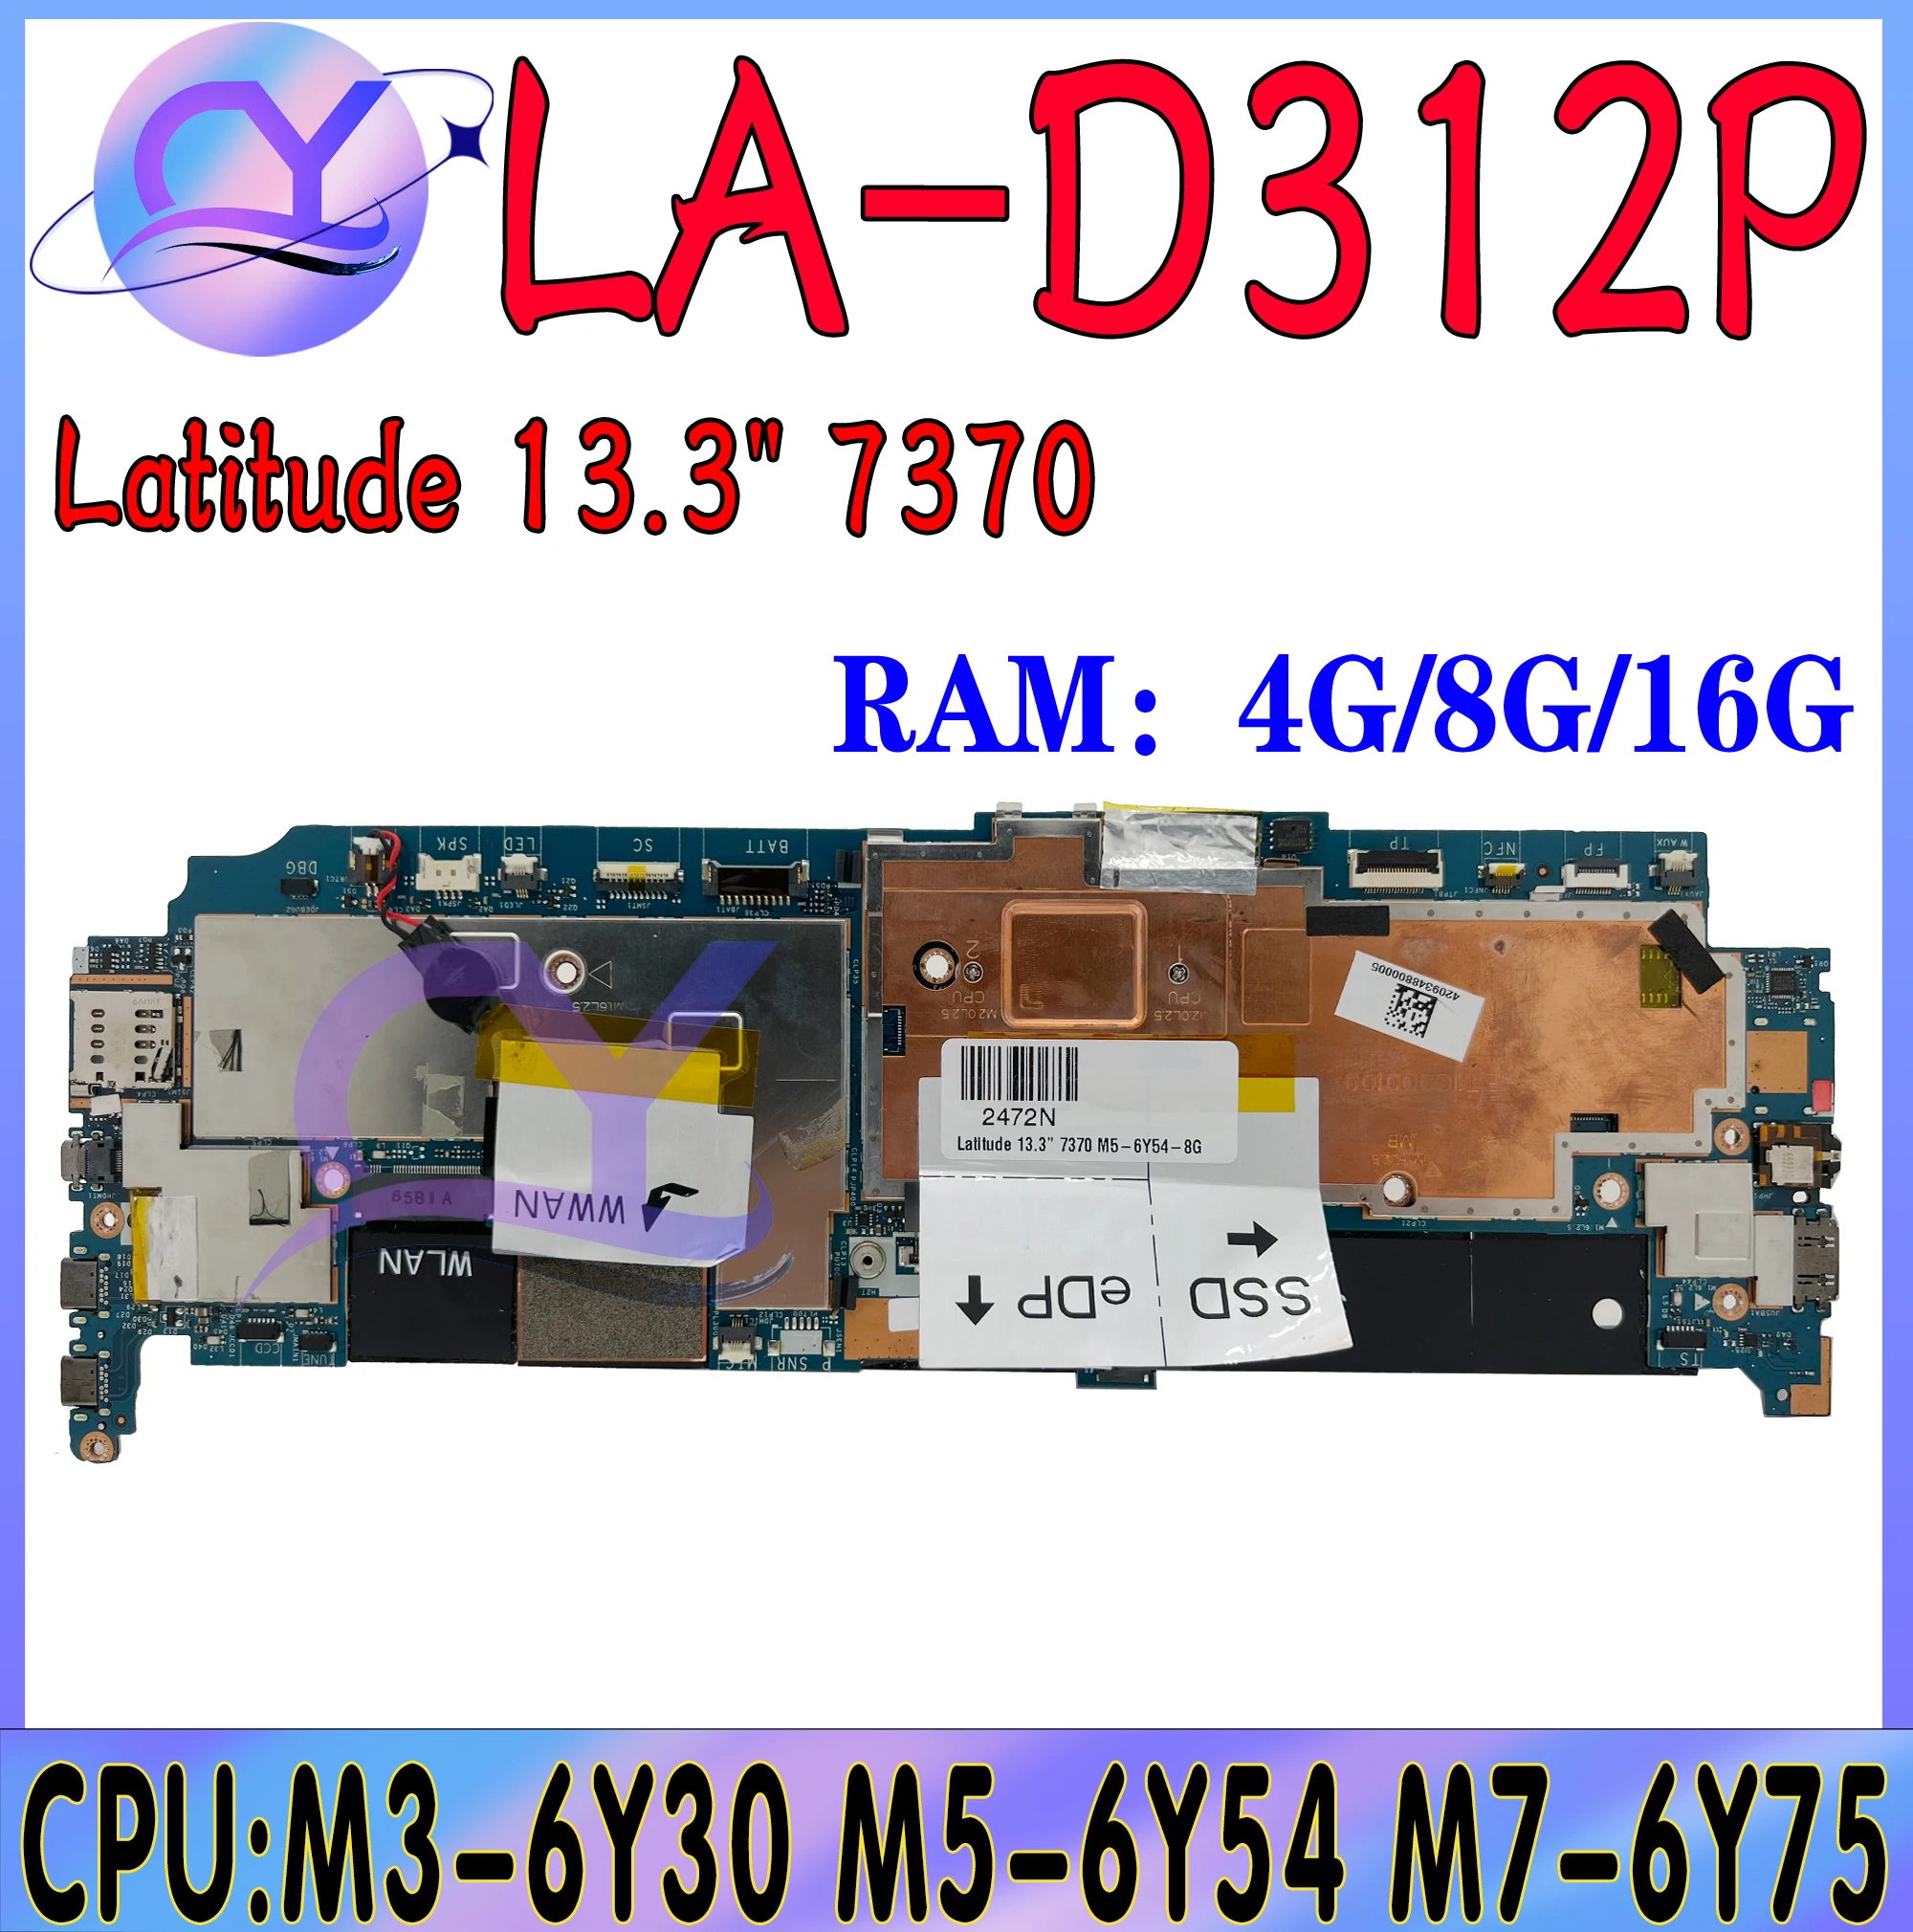 

LA-D312P Mainboard For Dell Latitude 13.3" 7370 CN-01JF8K 01JF8K AAU30 Laptop Motherboard With M3 M5 M7 4GB/8GB/16GB-RAM